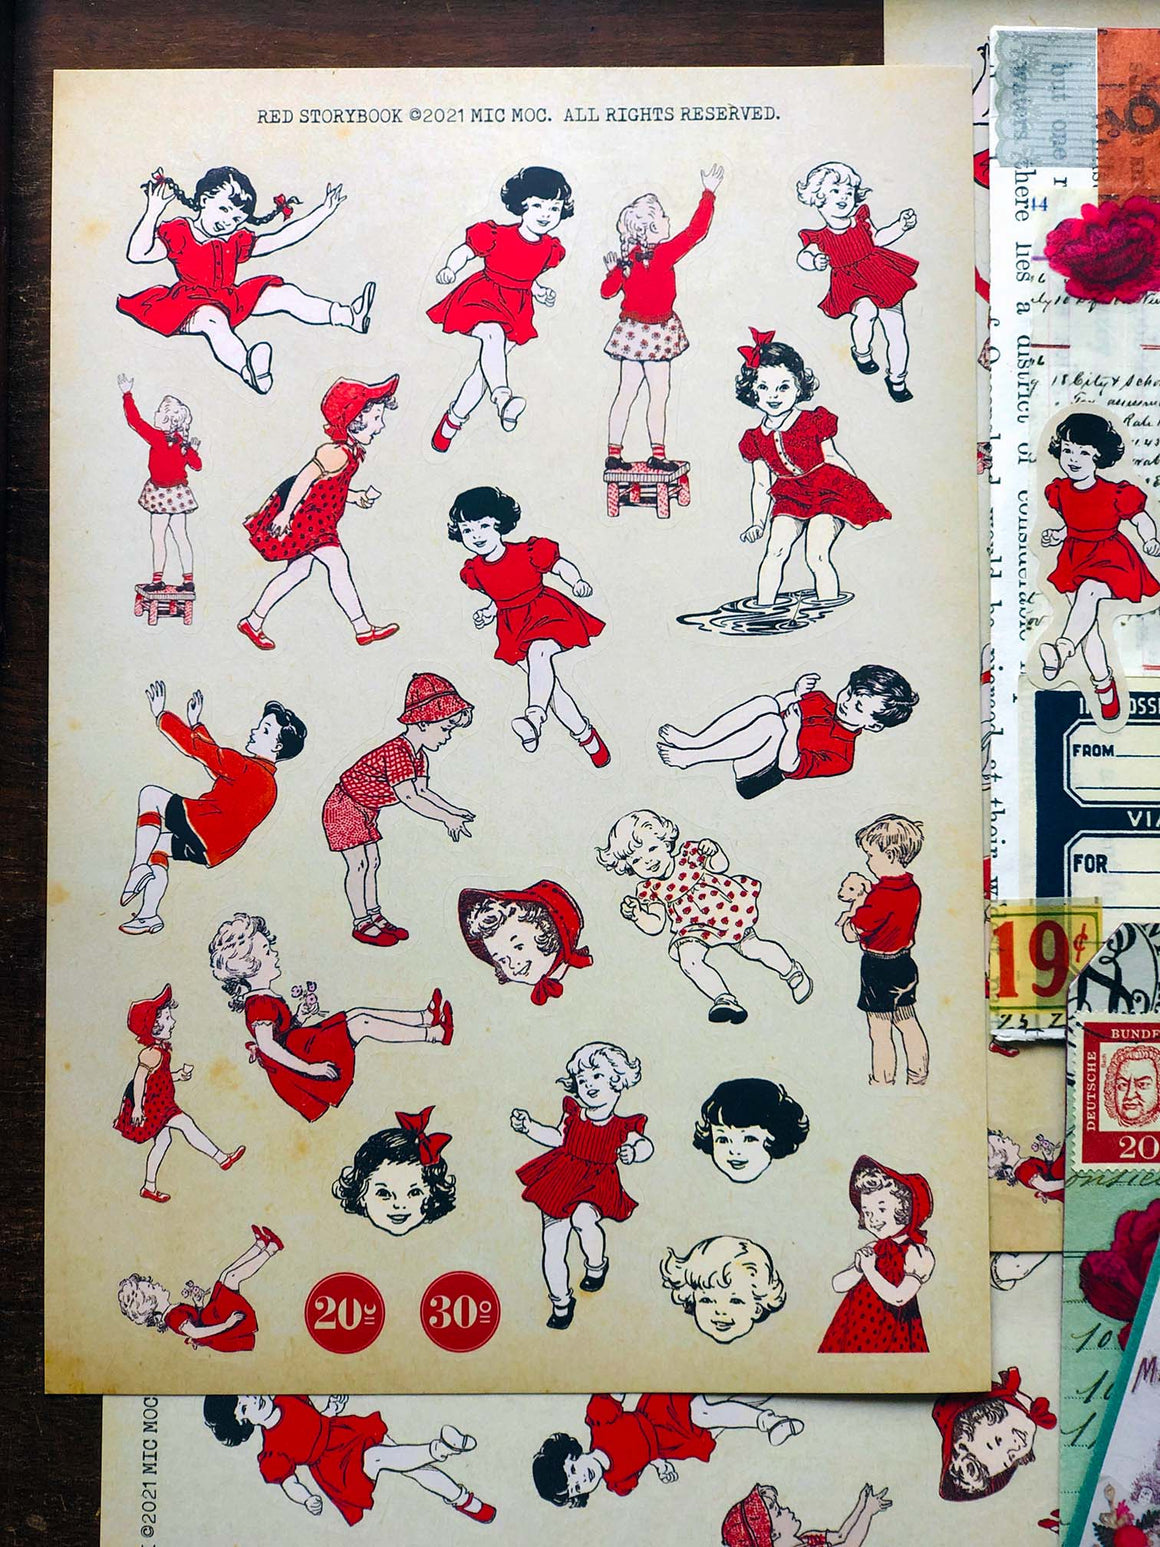 'My Red Storybook' Vintage Children's Illustrations A5 Sticker Set from micmoc.com at Mic Moc Curated Emporium